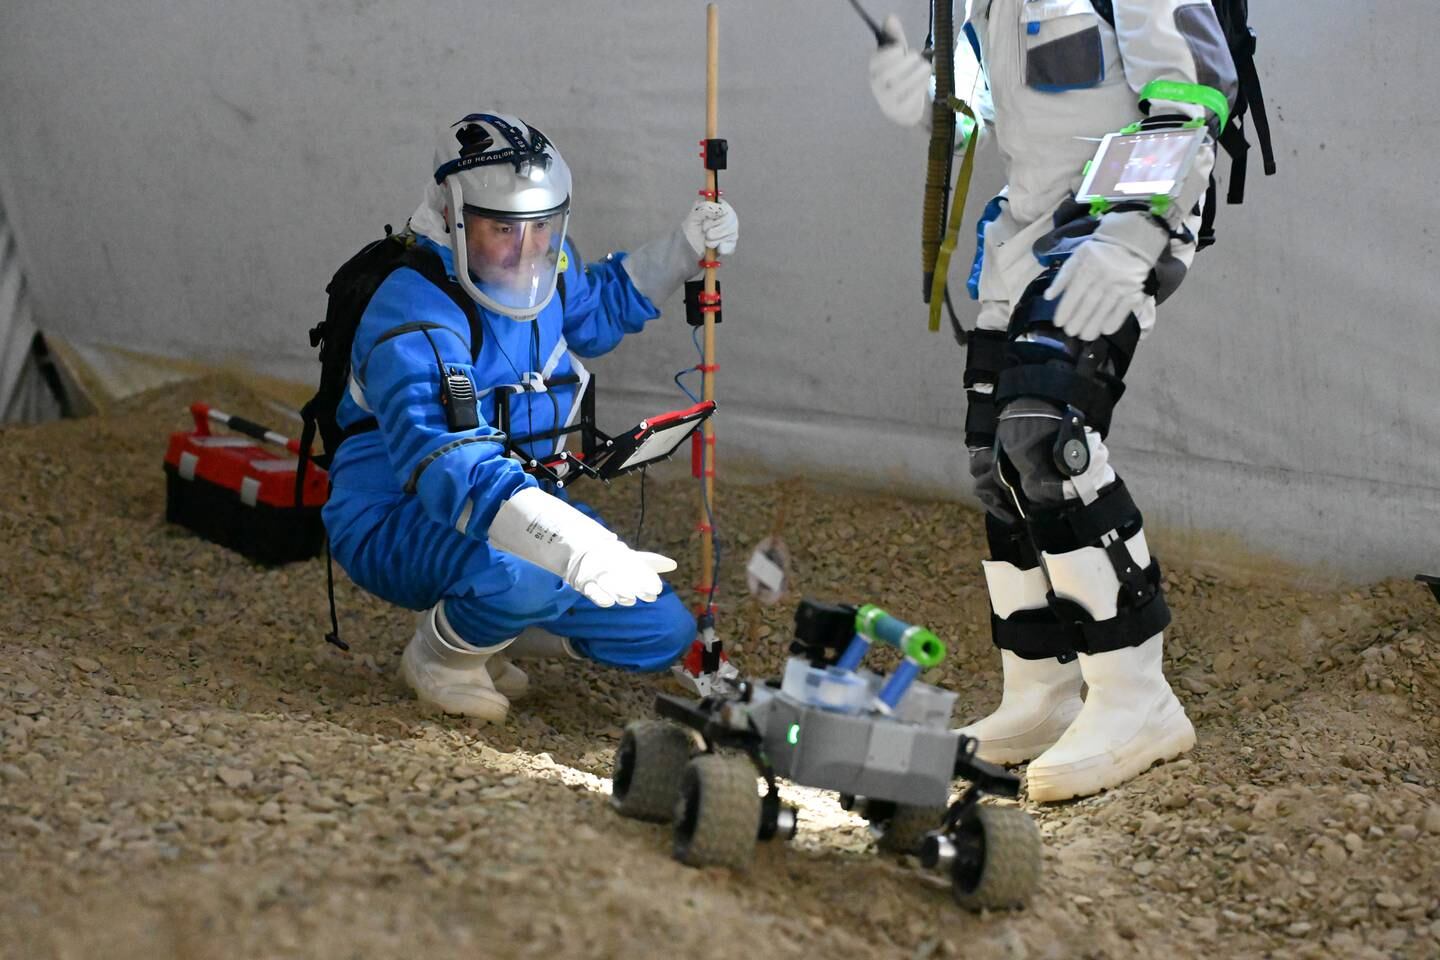 An astronaut trainee simulates gathering a surface sample on the moon. The simulation, also known as an analog mission, trains aspiring astronauts on what it's like to conduct missions off-planet, The three-week training period is spent entirely underground to ensure conditions are as similar to those off-planet as possible. Photo: LunAres Research Station